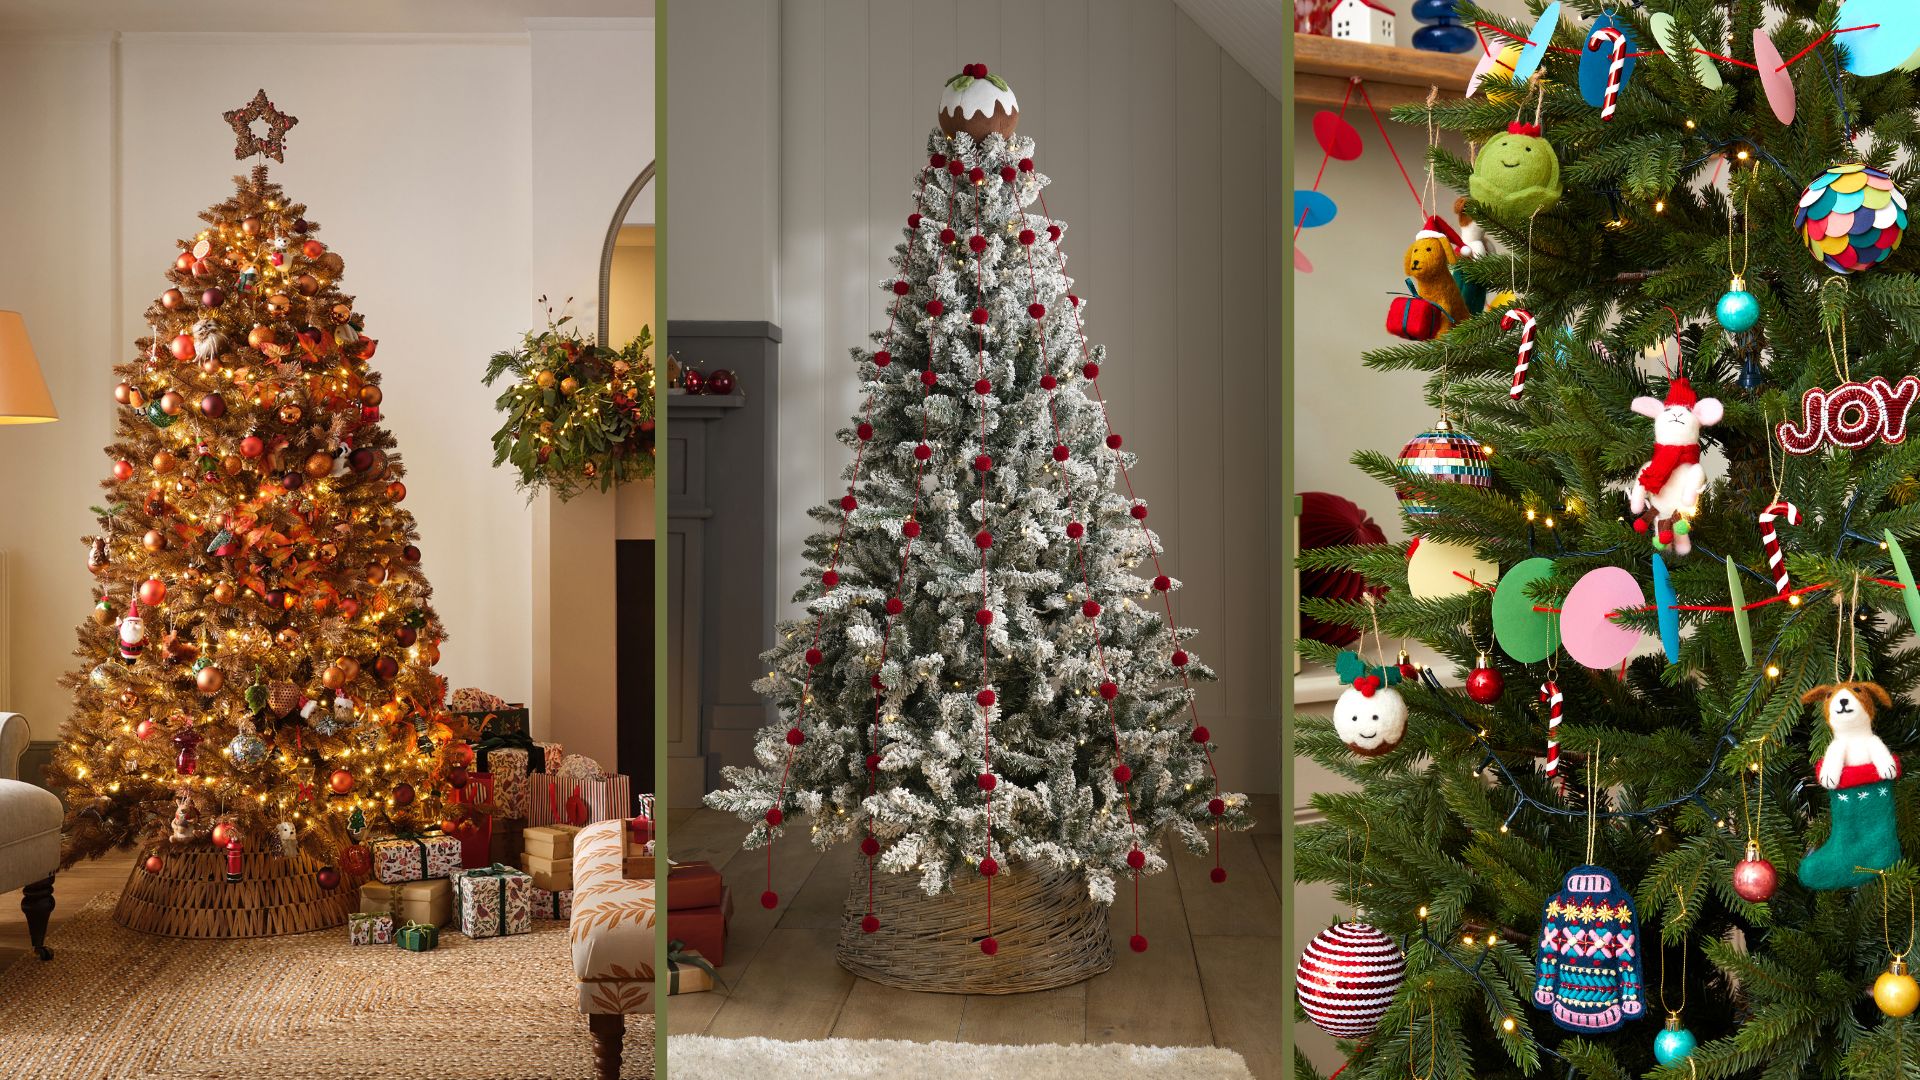 Here is How You Can Elevate A Simple Silver And White Christmas Tree